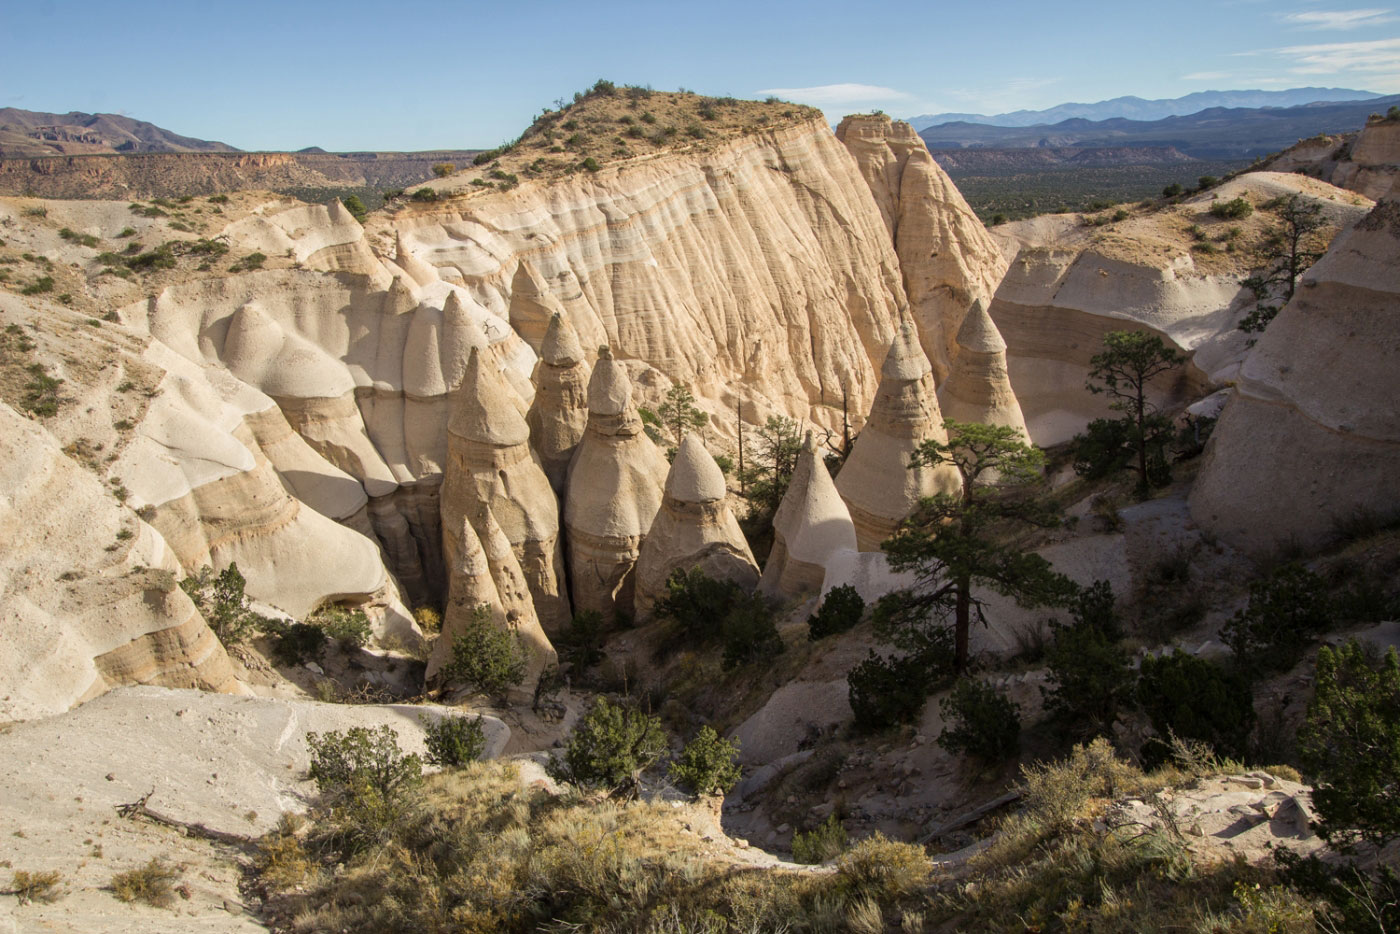 Hike Tent Rocks Slot Canyon and Cave Loop in Kasha-Katuwe Tent Rocks National Monument, New Mexico - Stav is Lost